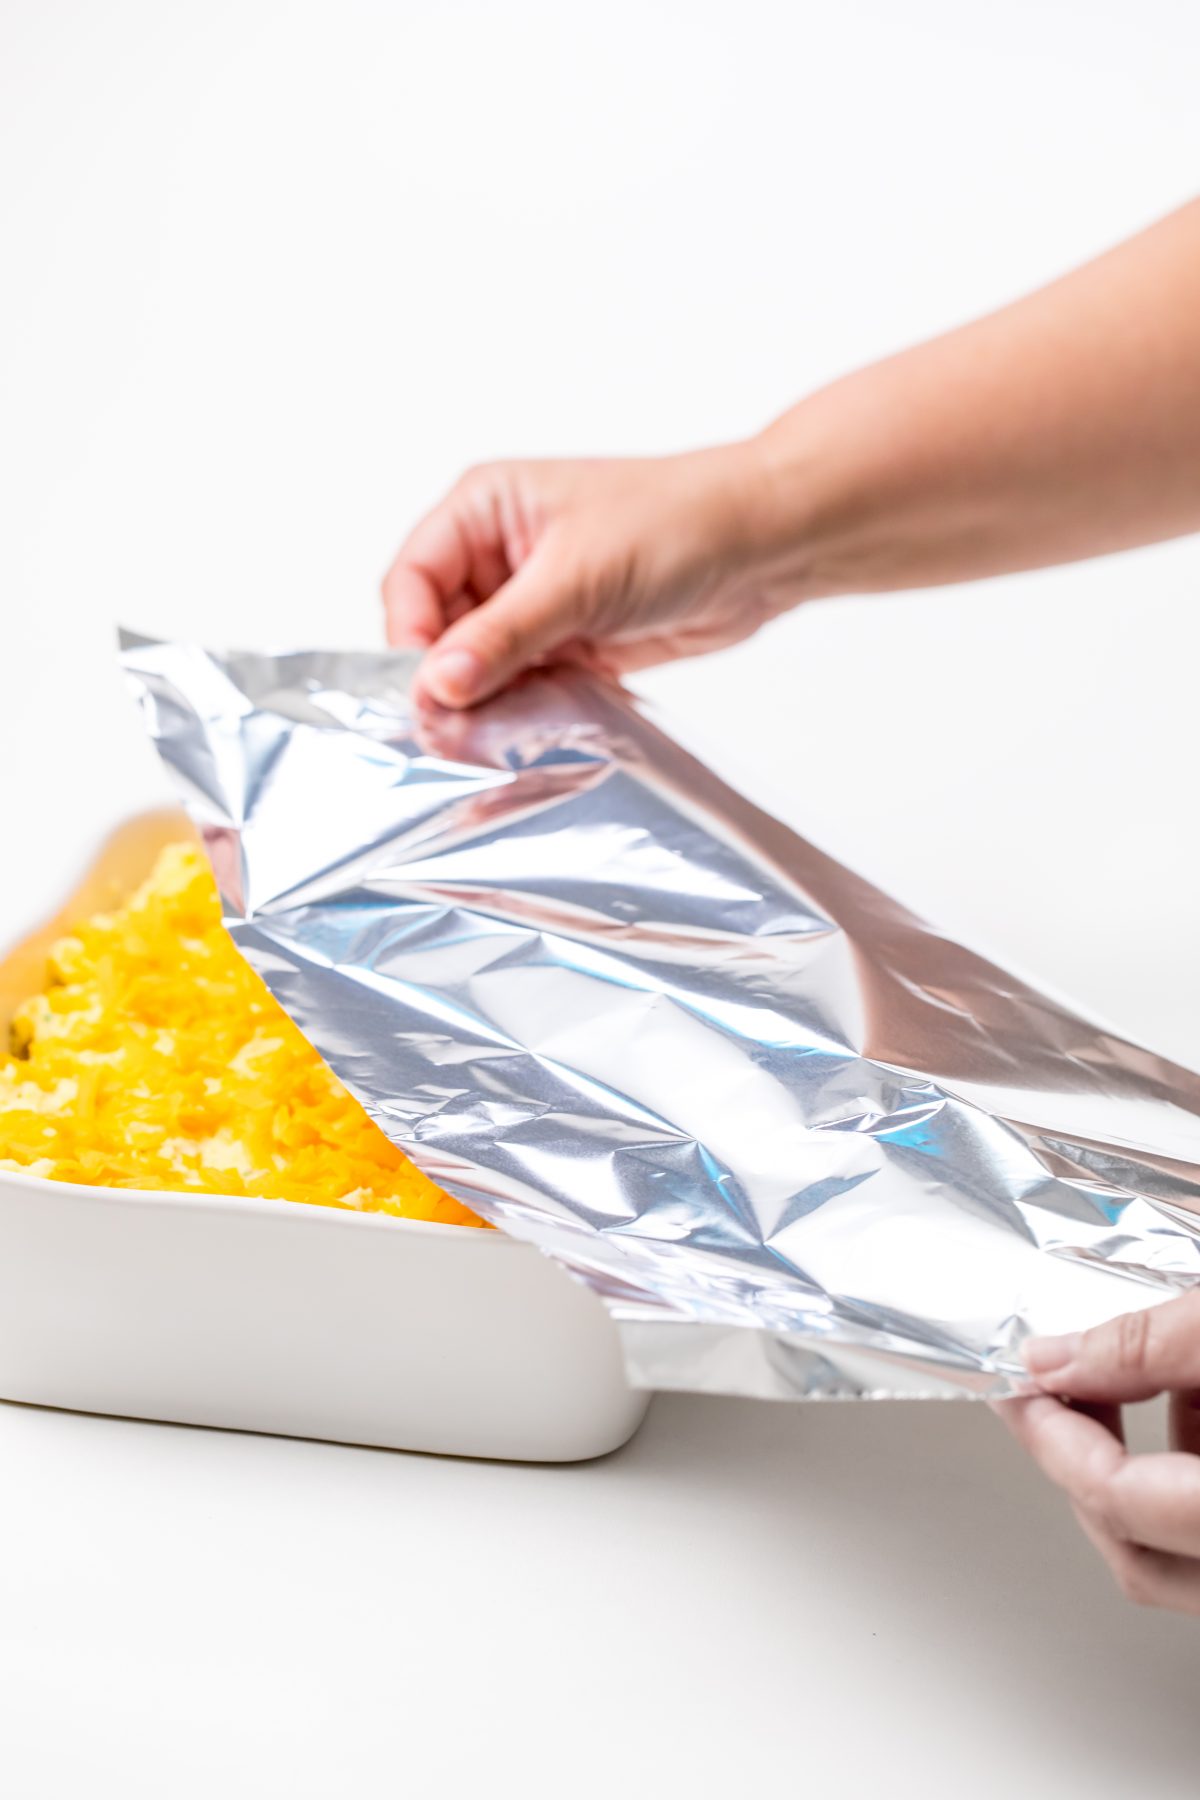 Cover the potatoes with foil to prevent the cheese from burning.